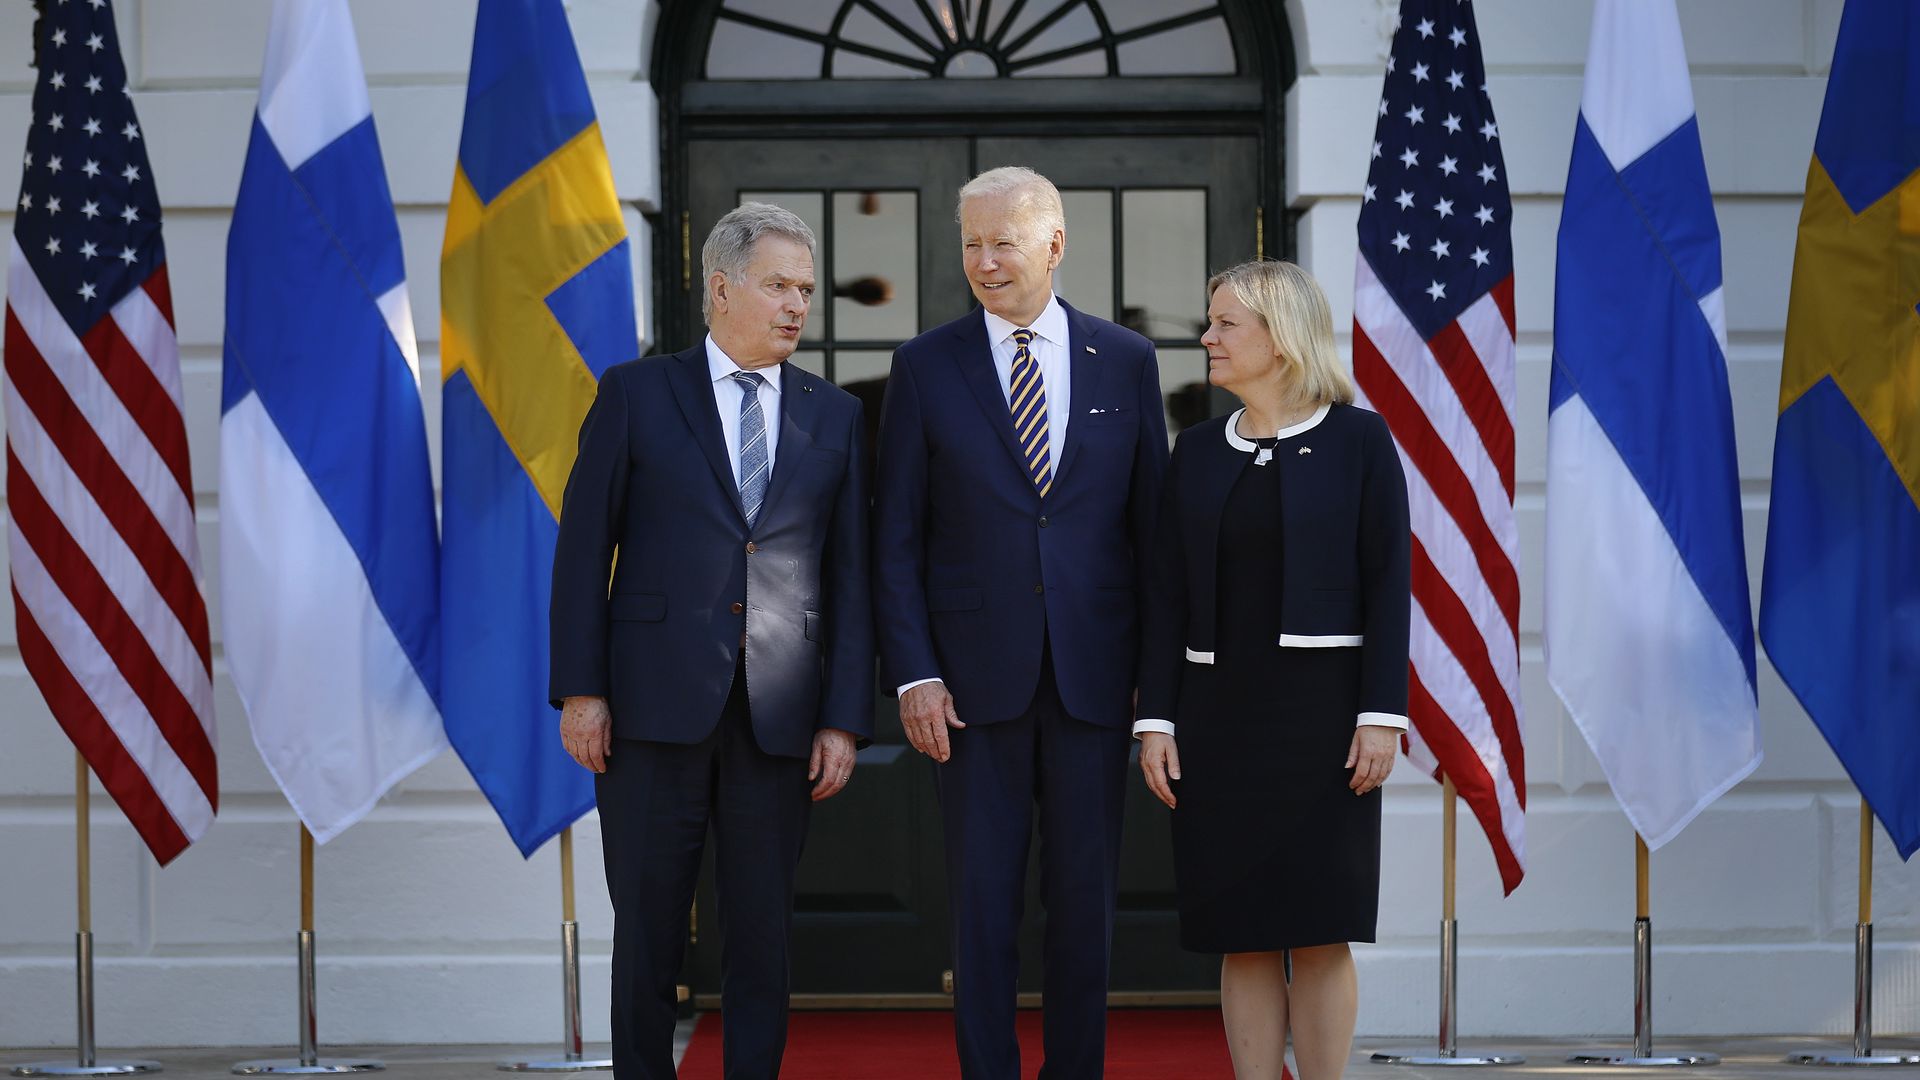 Biden with the leaders of Sweden and Finland